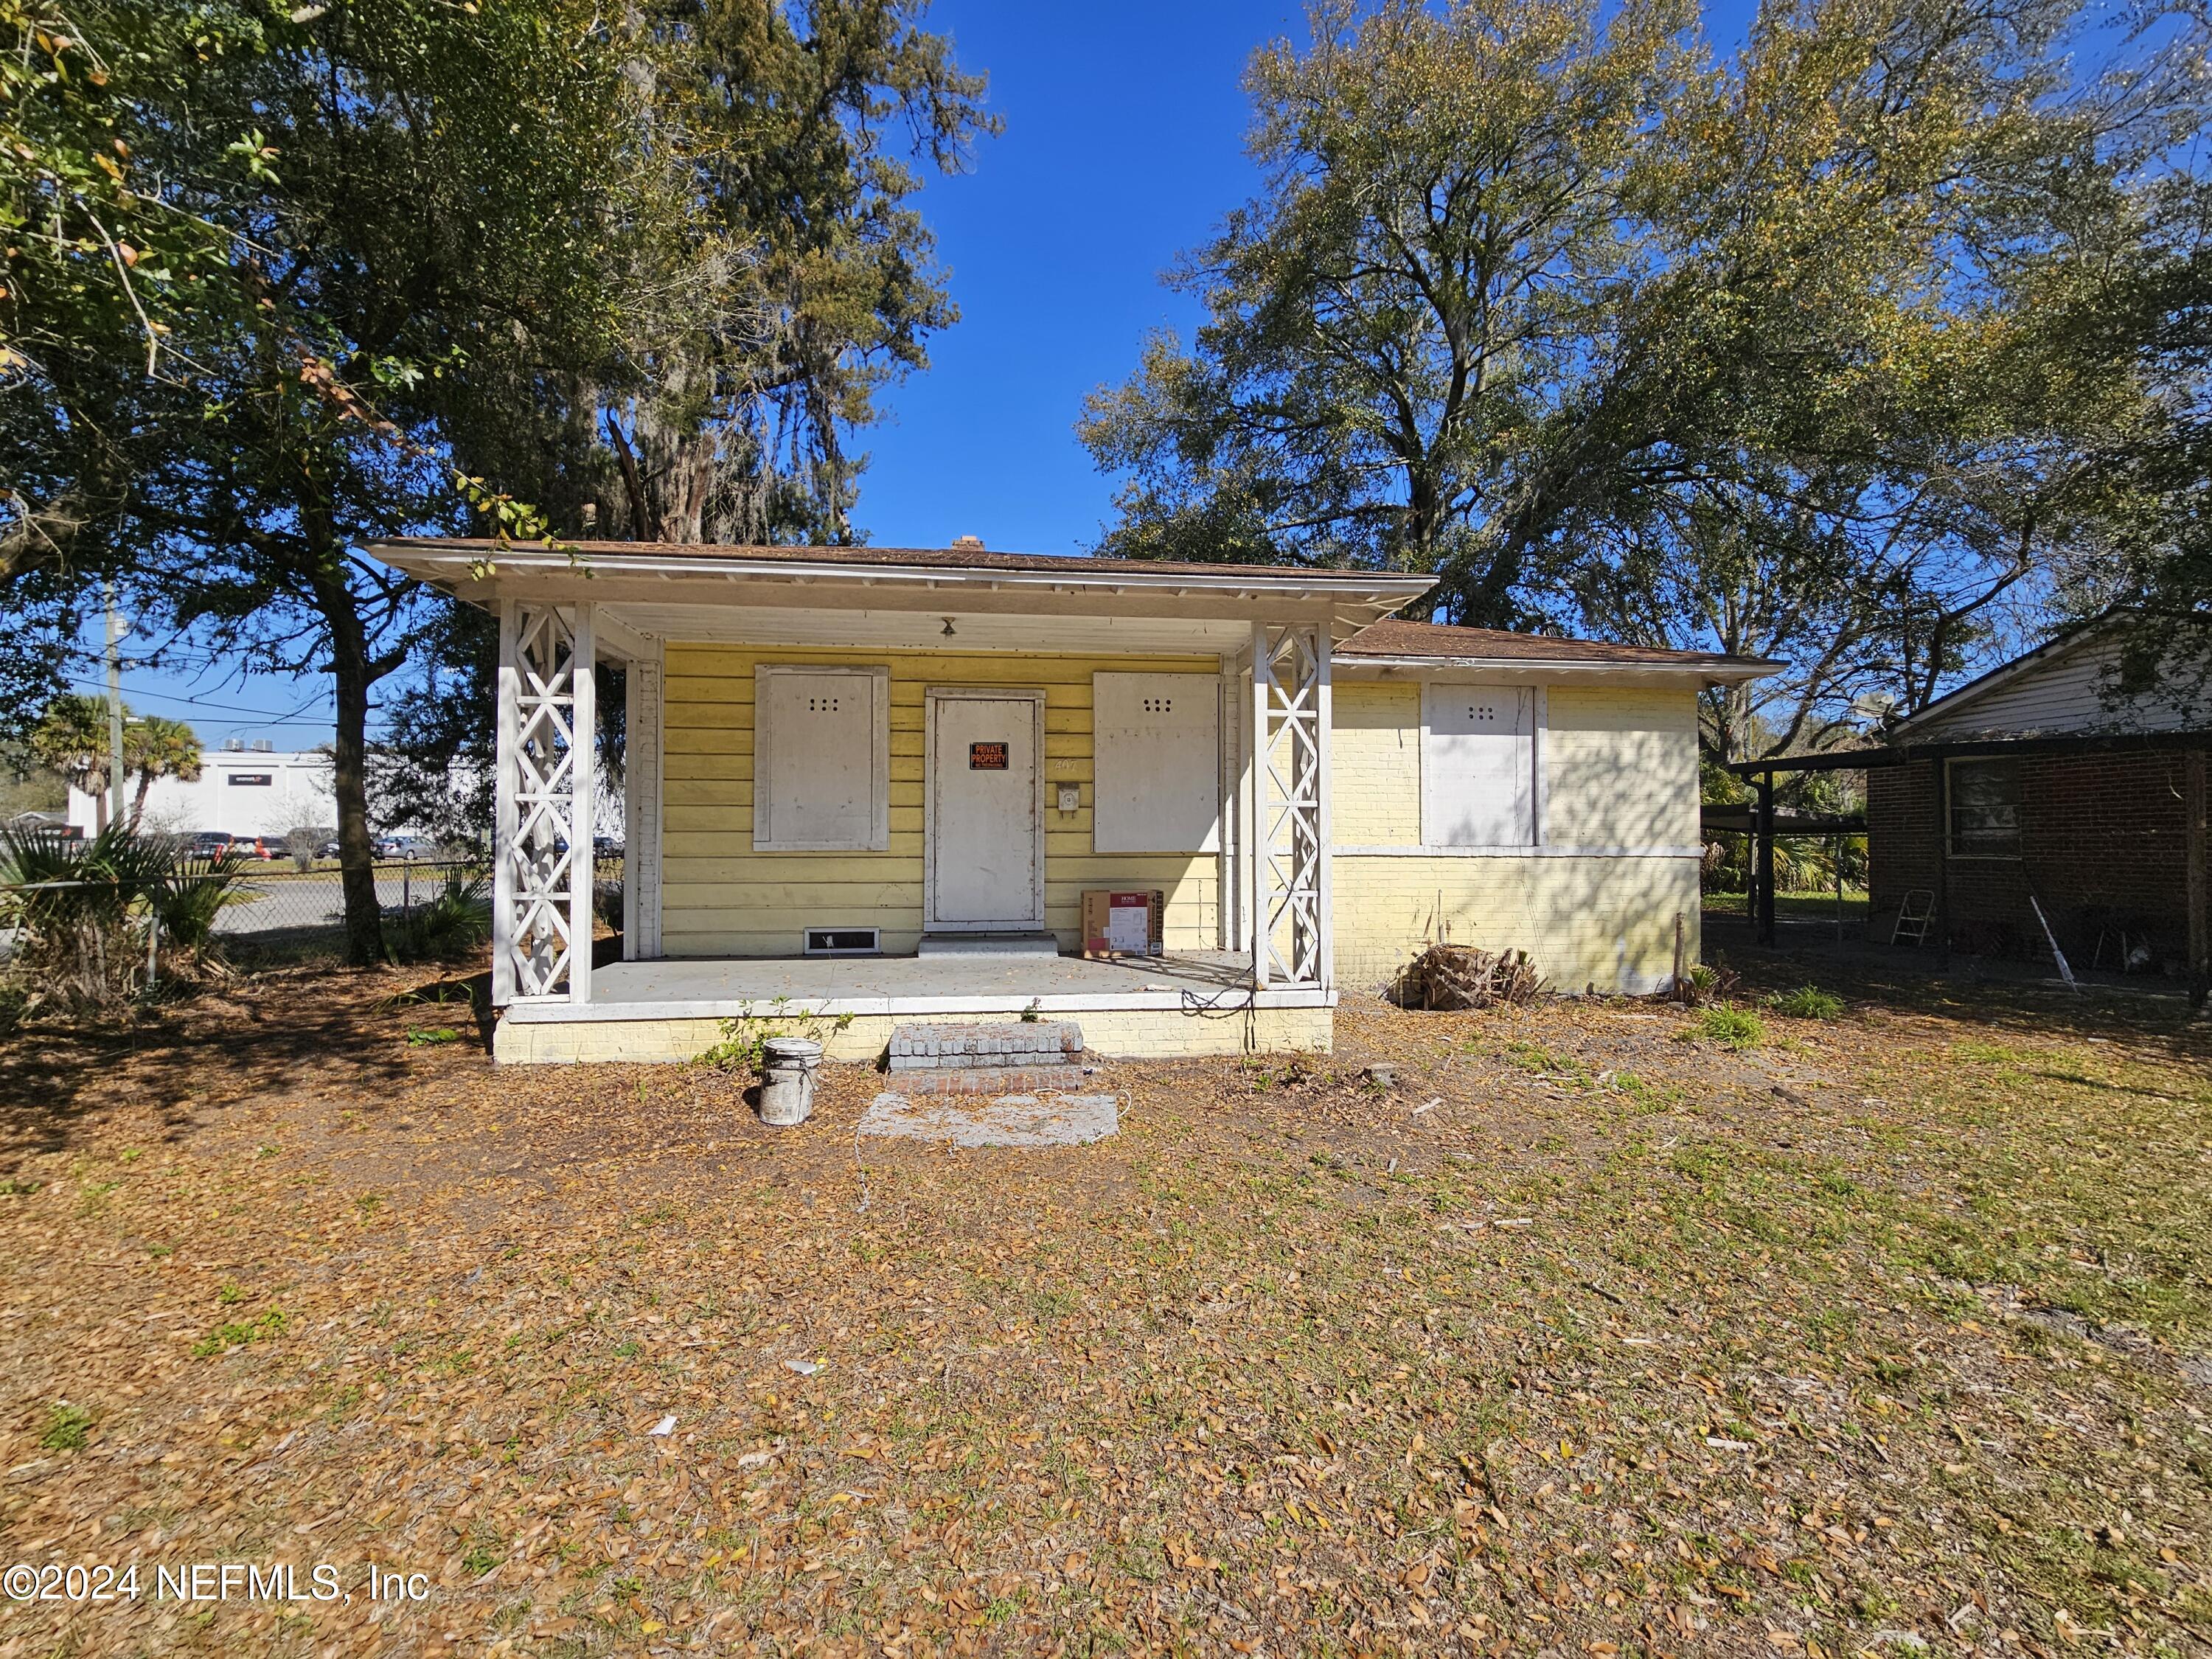 Jacksonville, FL home for sale located at 407 Springfield Court N, Jacksonville, FL 32206